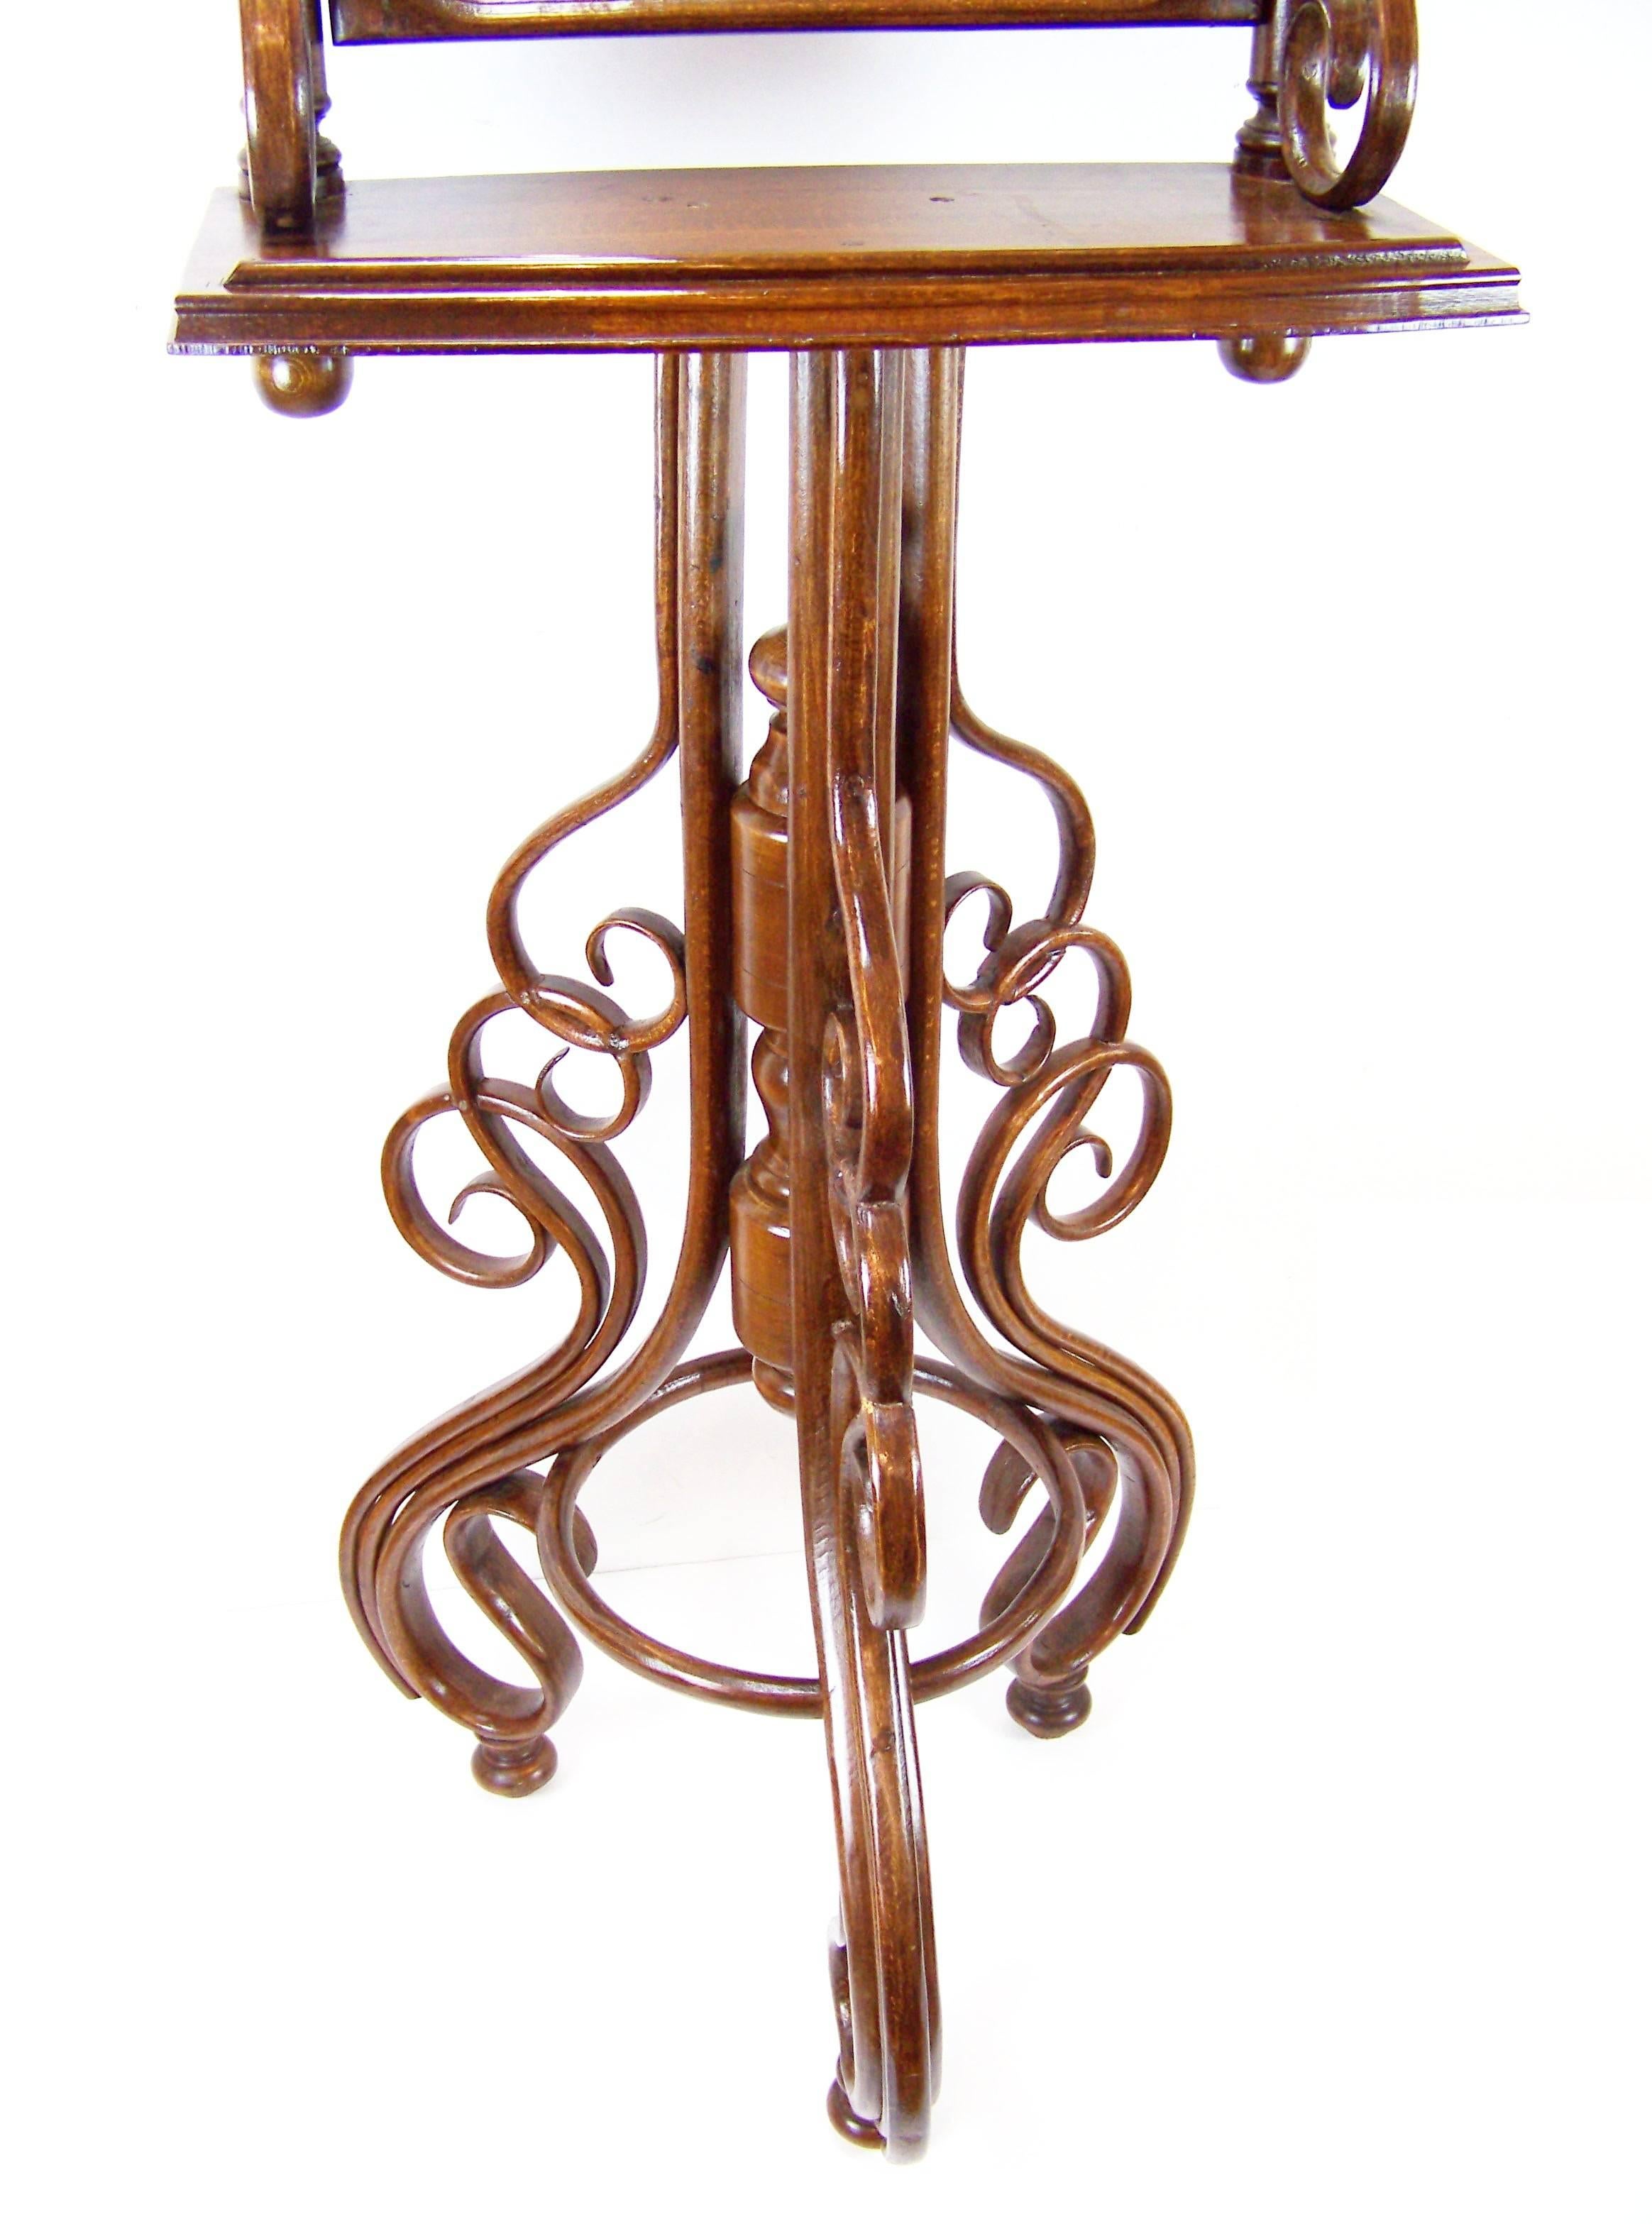 Art Nouveau Dressing Table in the Style of Thonet, circa 1880